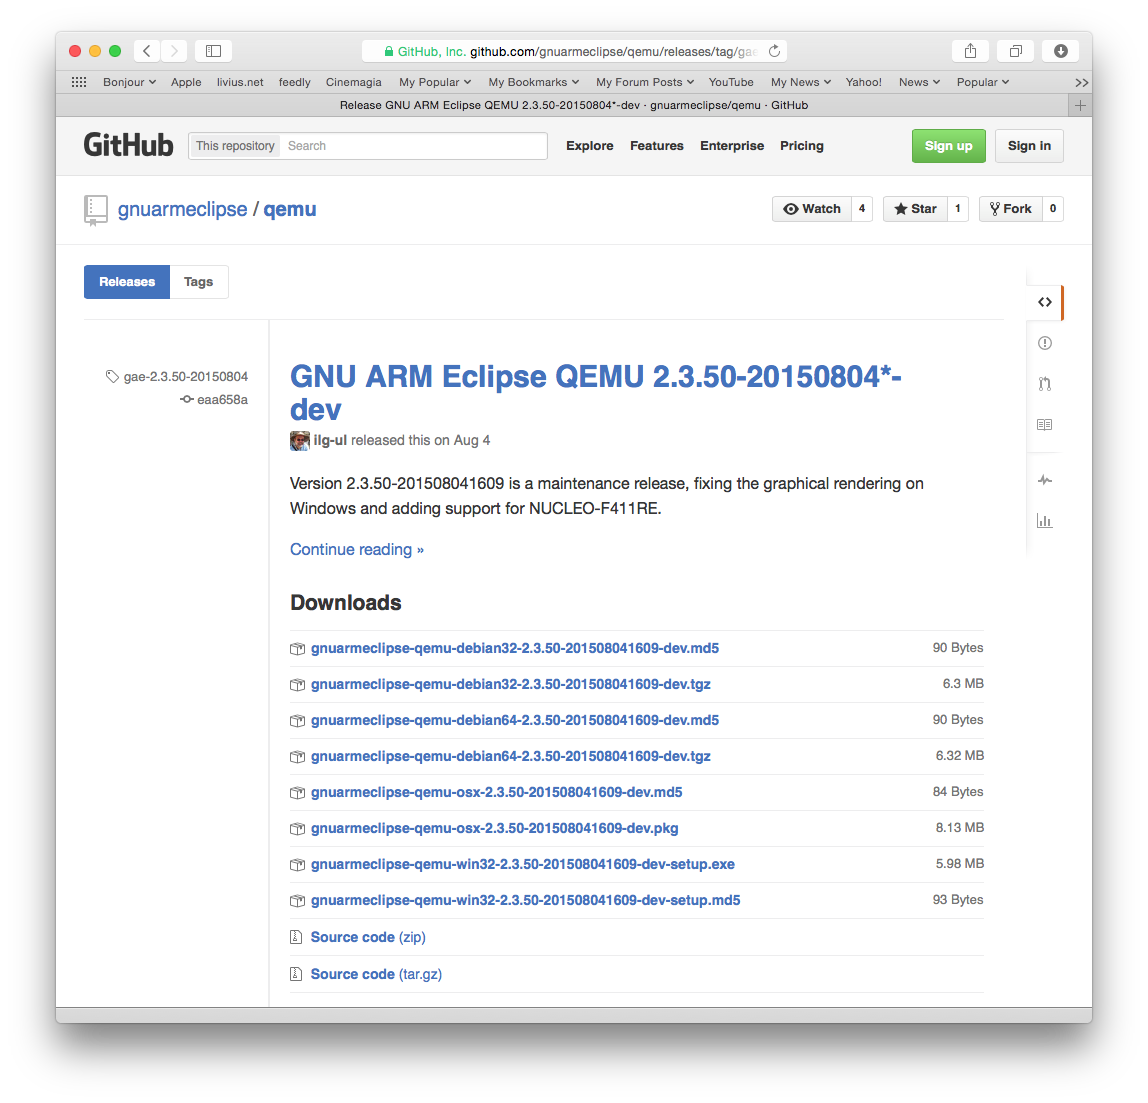 The QEMU Releases page